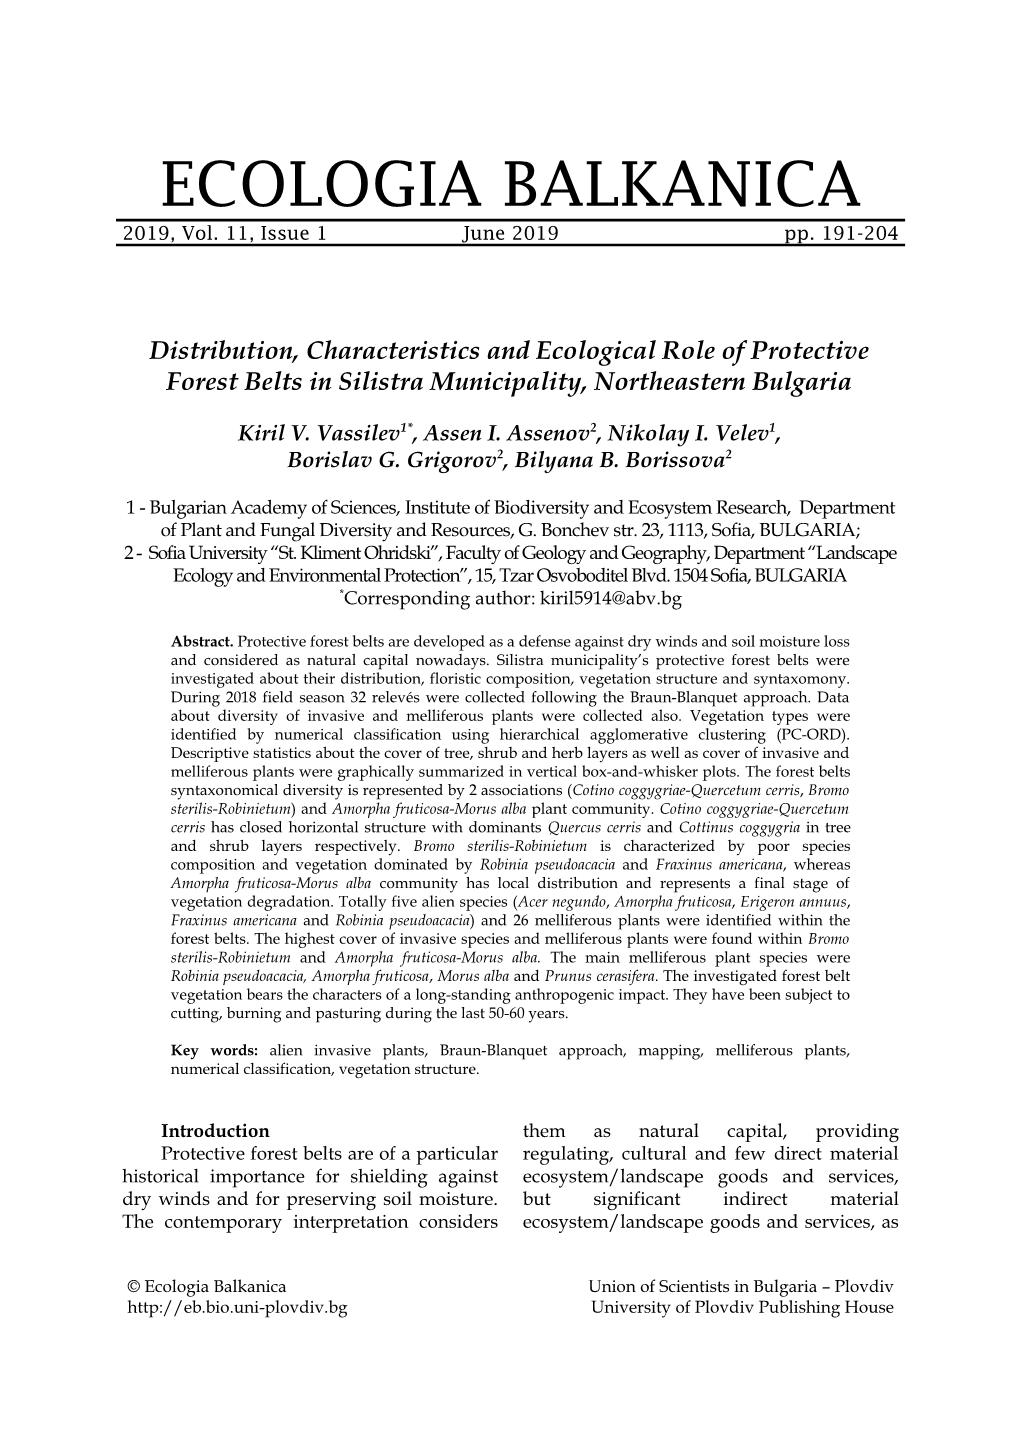 Distribution, Characteristics and Ecological Role of Protective Forest Belts in Silistra Municipality, Northeastern Bulgaria